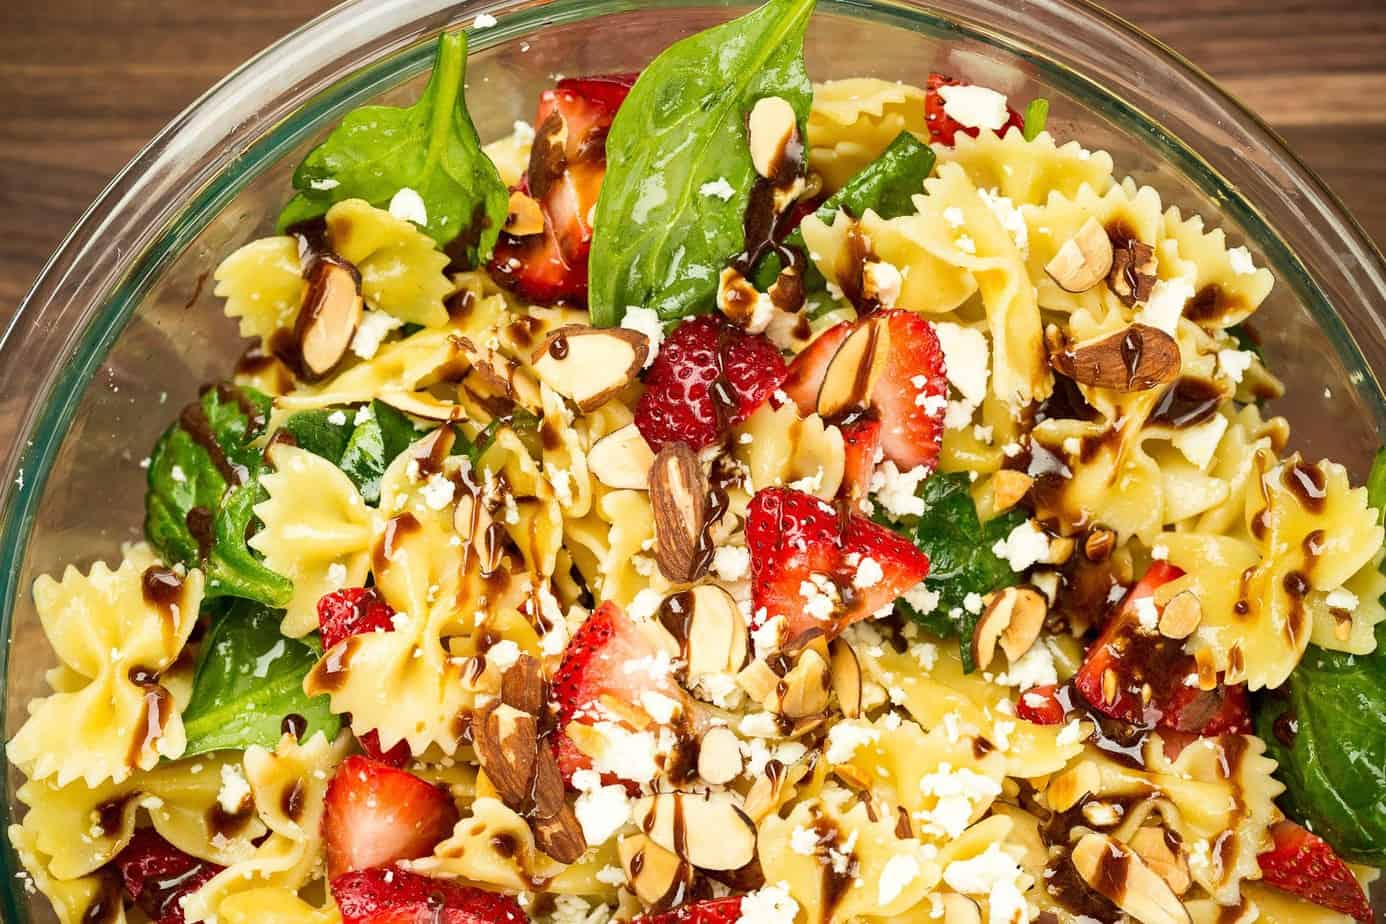 A bowl of strawberry pasta salad with balsamic dressing